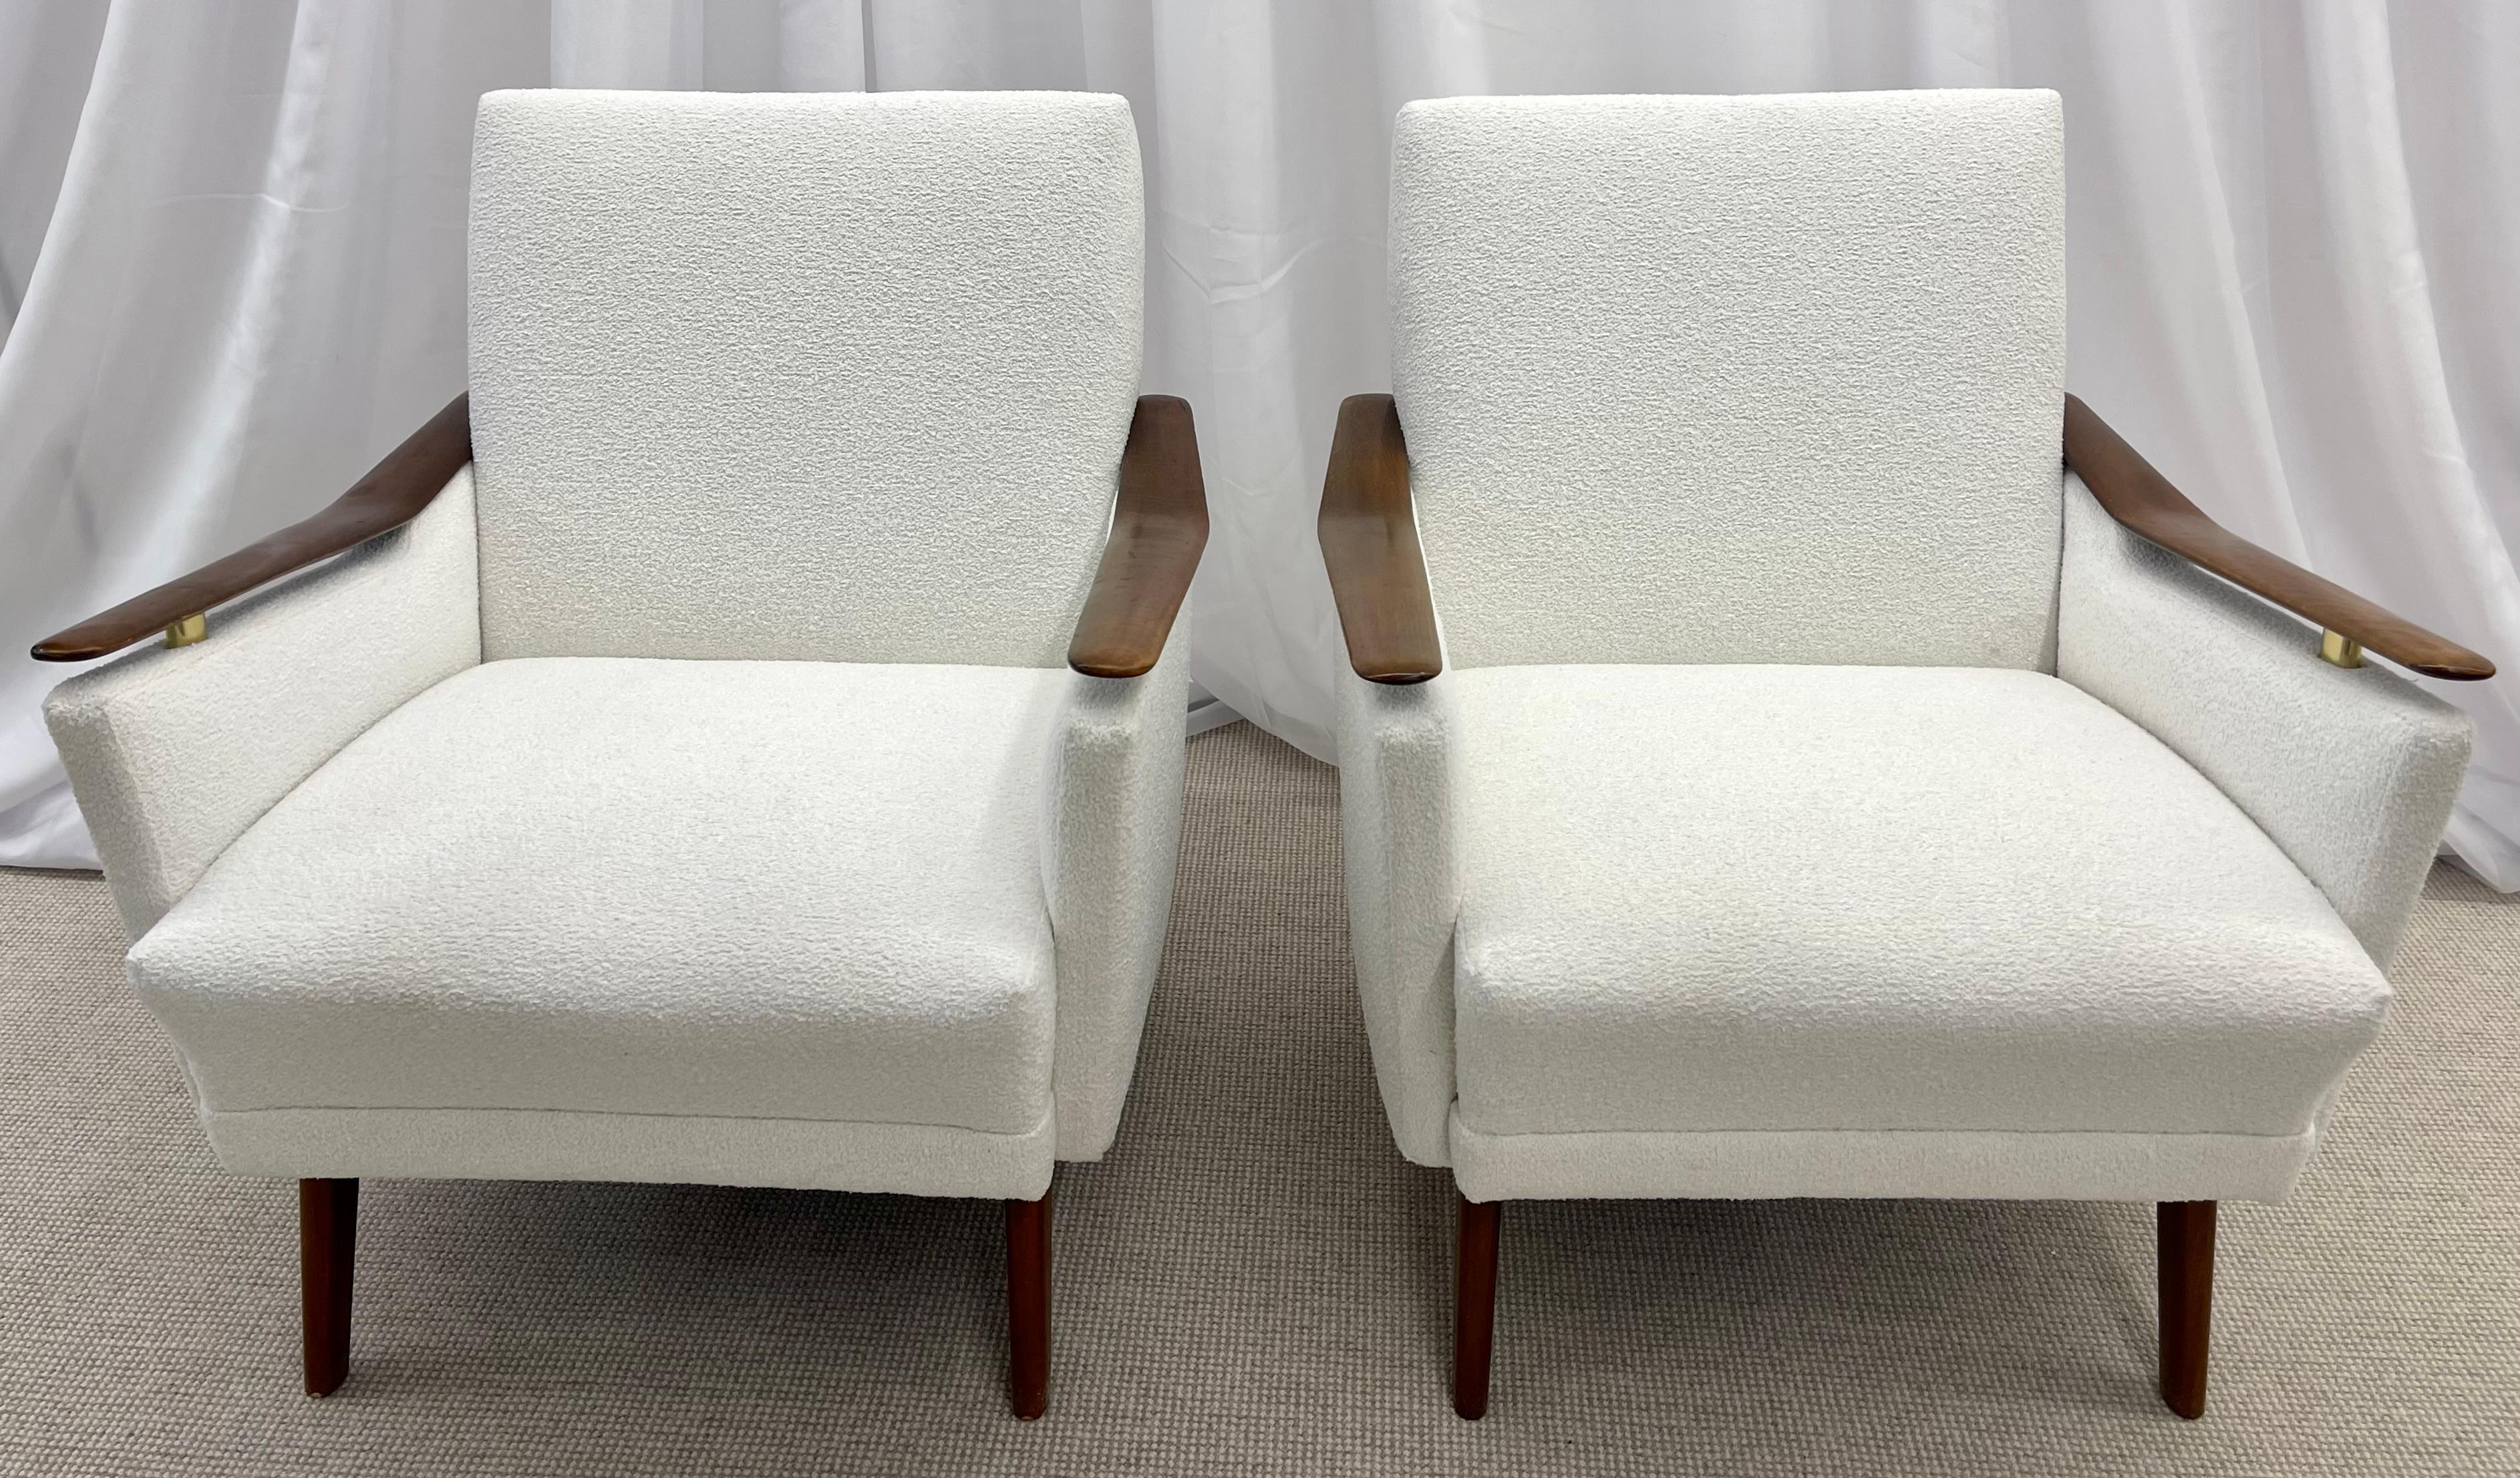 Pair of Mid-Century Danish lounge chairs, Manner of Finn Juhl, Bouclé, 1970s.
Newly Upholstered in white bouclé this finely crafted pair of mahogany floating arm chairs have brass supports under each arm. The pair having been recently reupholstered